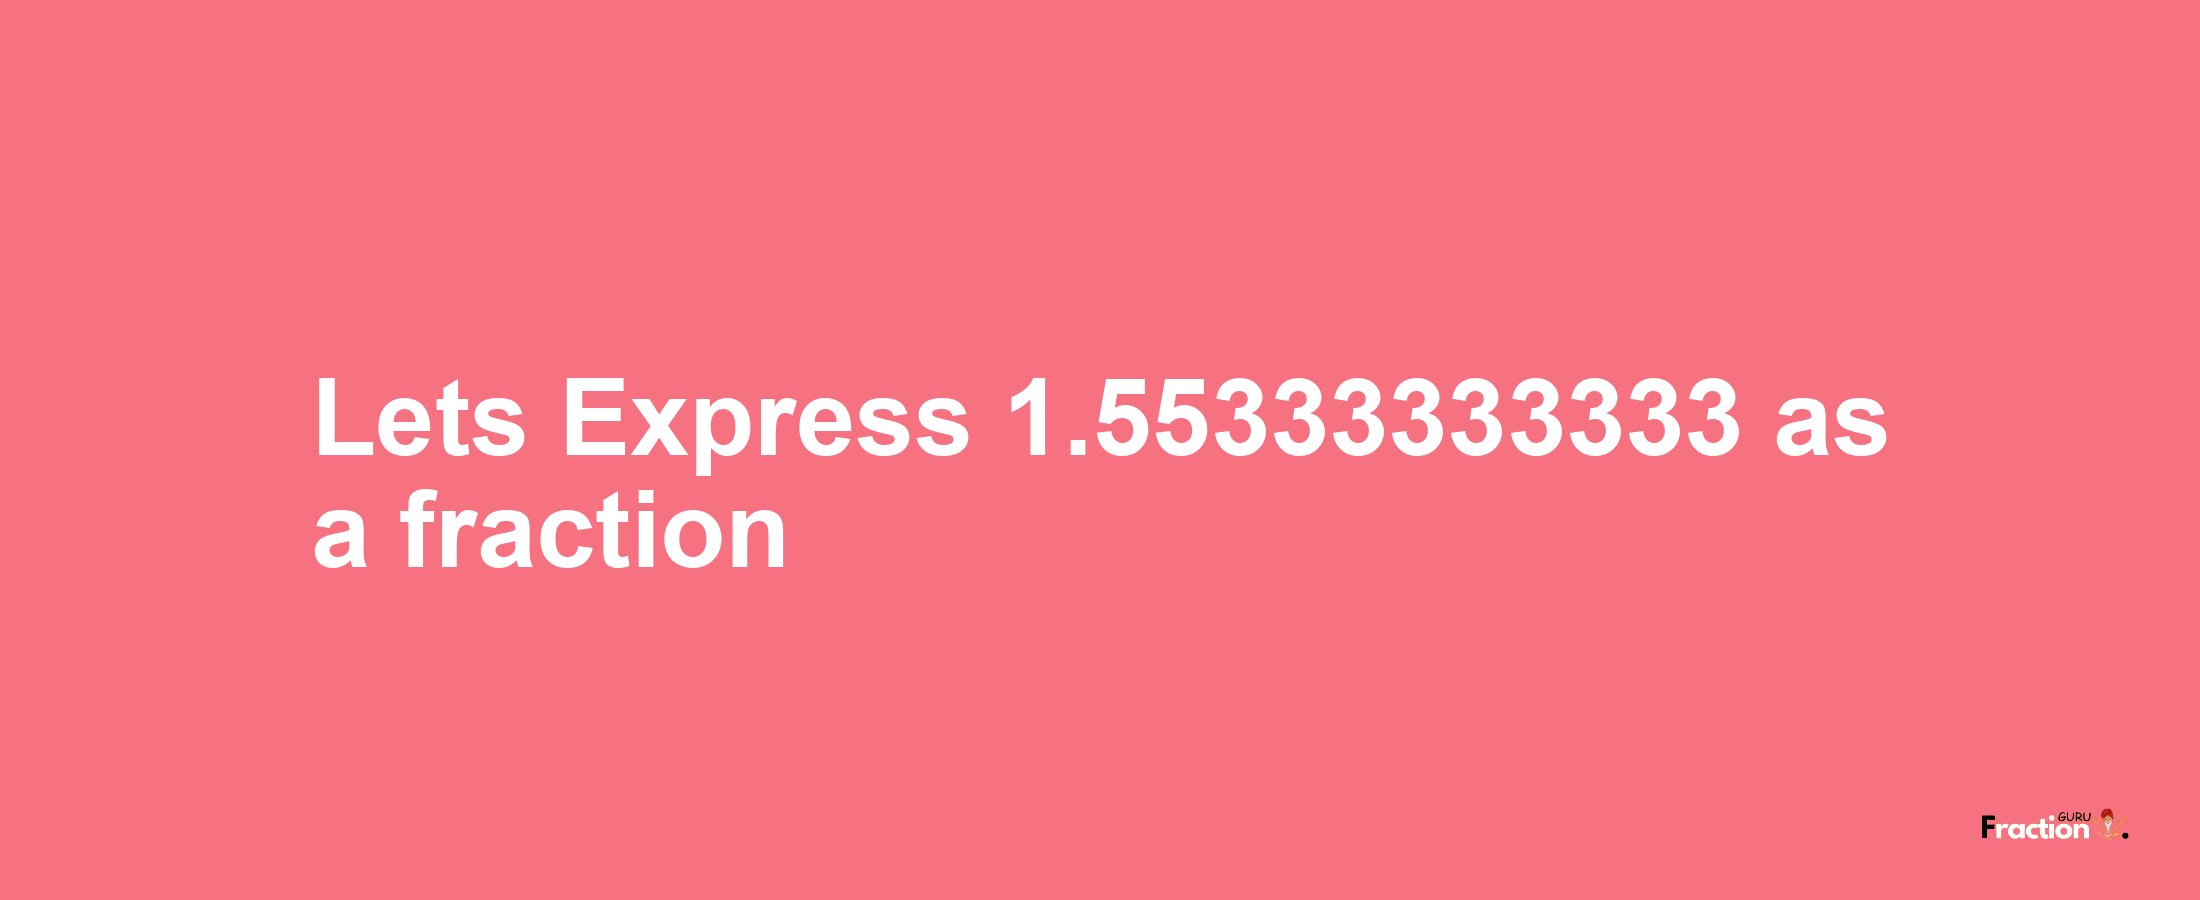 Lets Express 1.55333333333 as afraction